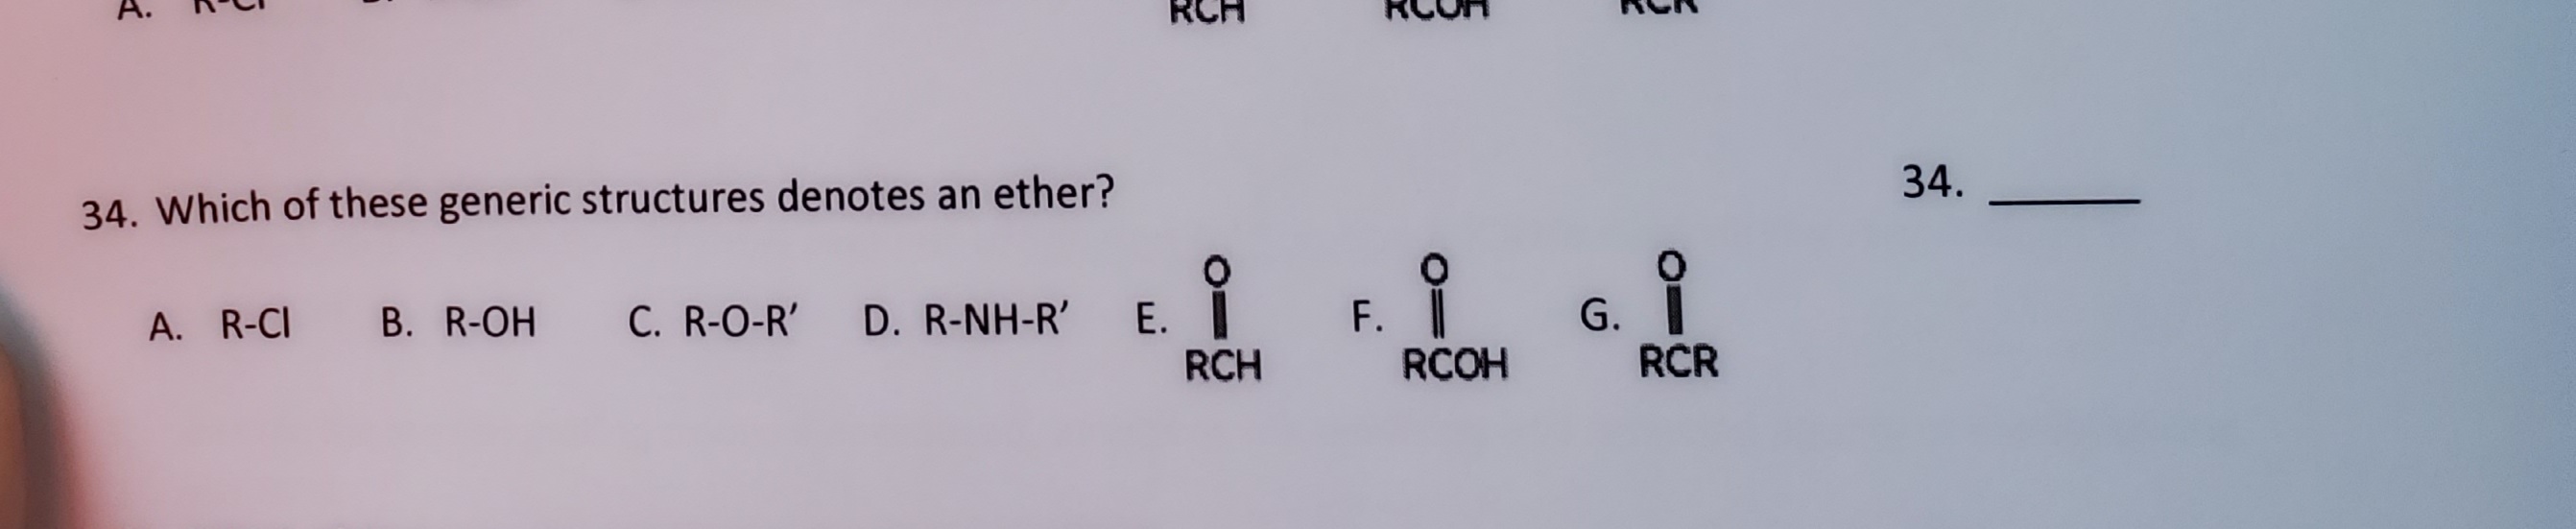 34. Which of these generic structures denotes an ether?
G.
RCR
В. R-OH
C. R-O-R'
E.
RCH
F.
A. R-CI
D. R-NH-R'
RCOH
